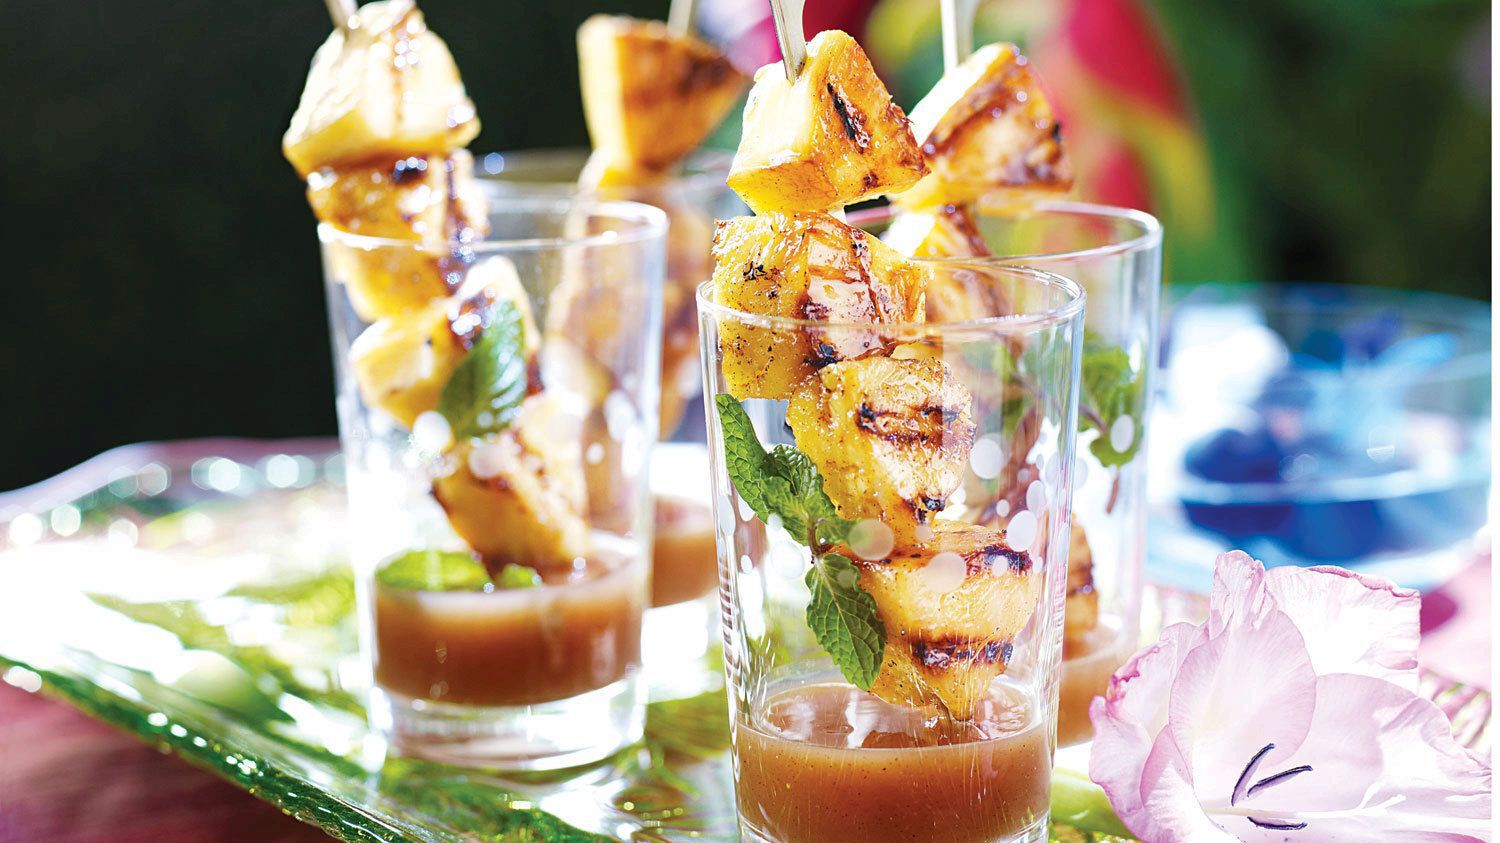 Grilled-Pineapple-with-Spiced-Fruit-Sauce-cropped